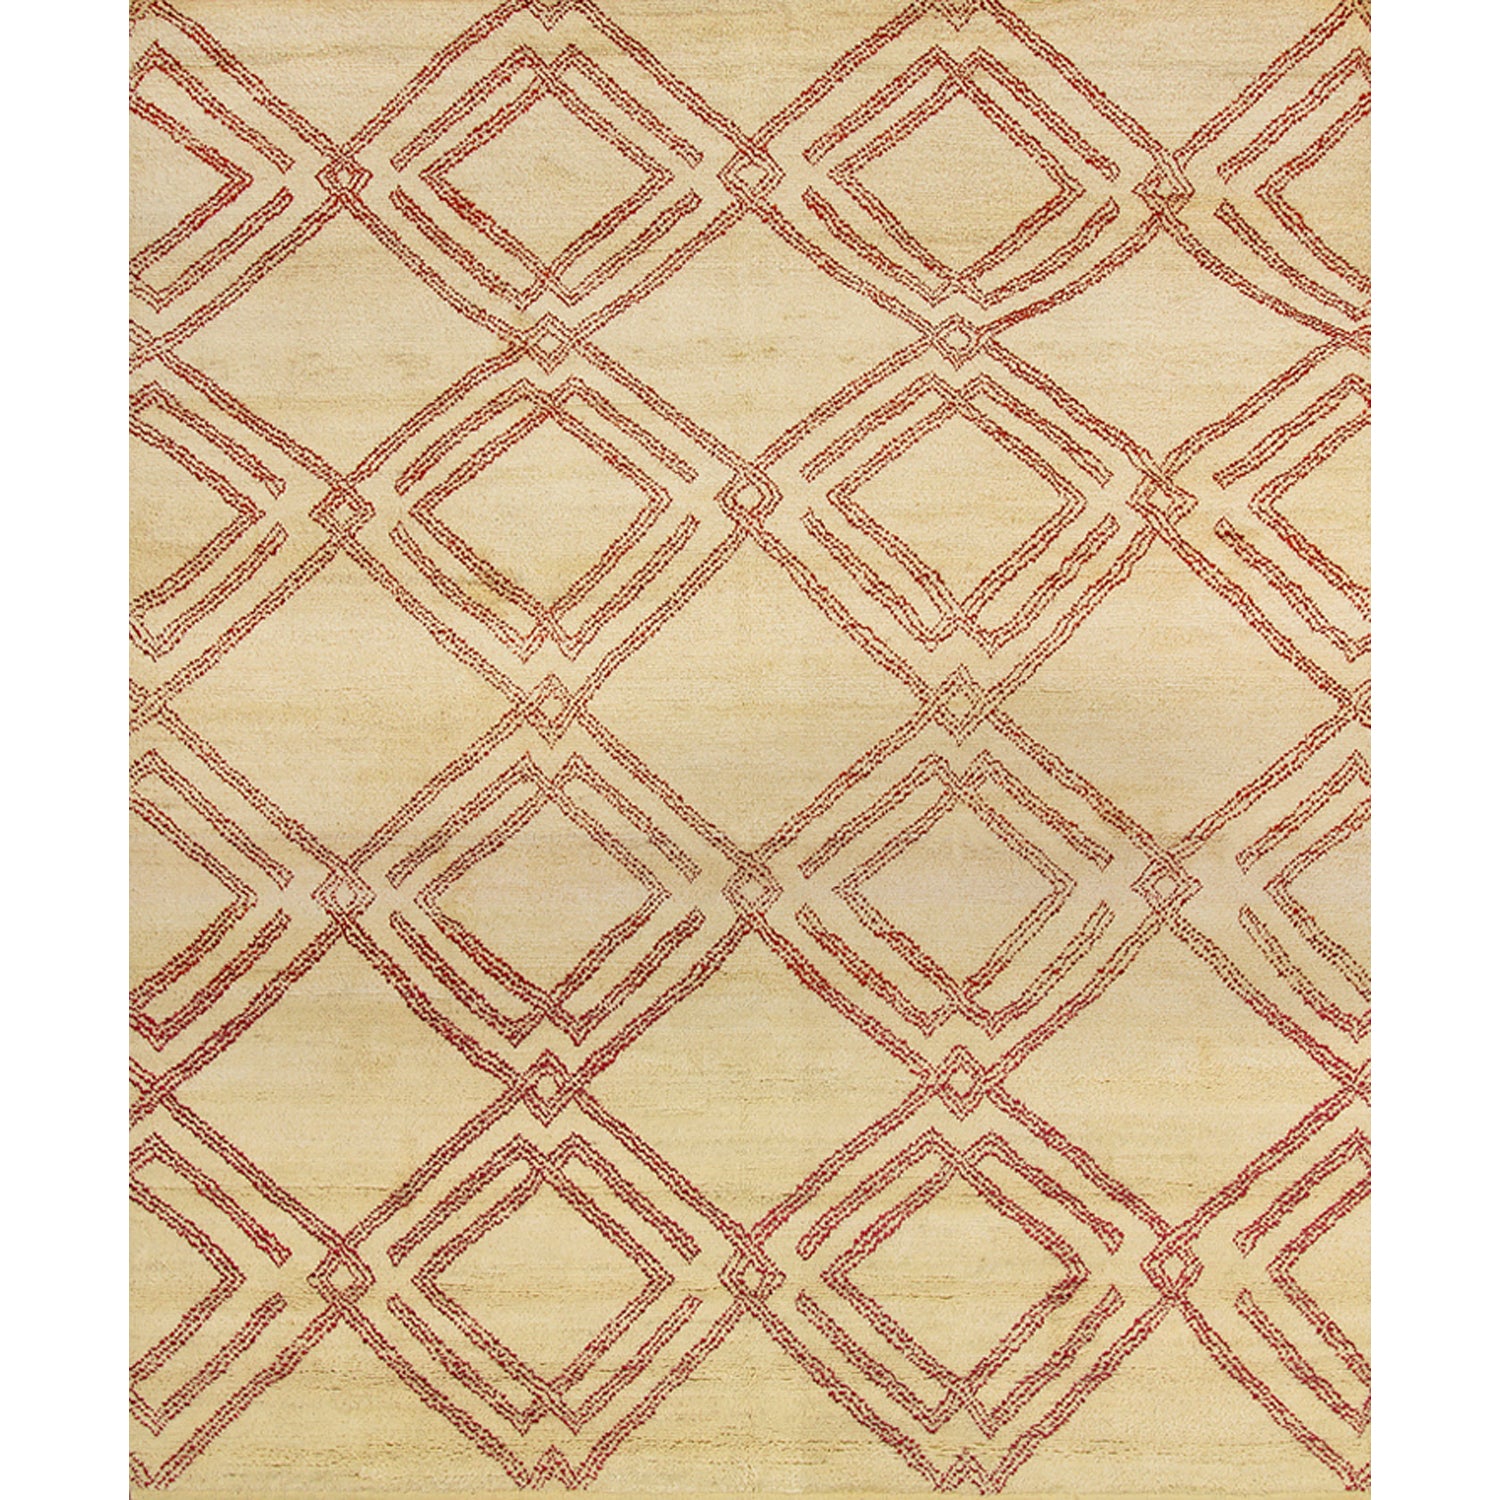 Rectangular woven high-pile rug in a large-scale interlocking diamond pattern in red on a cream field.